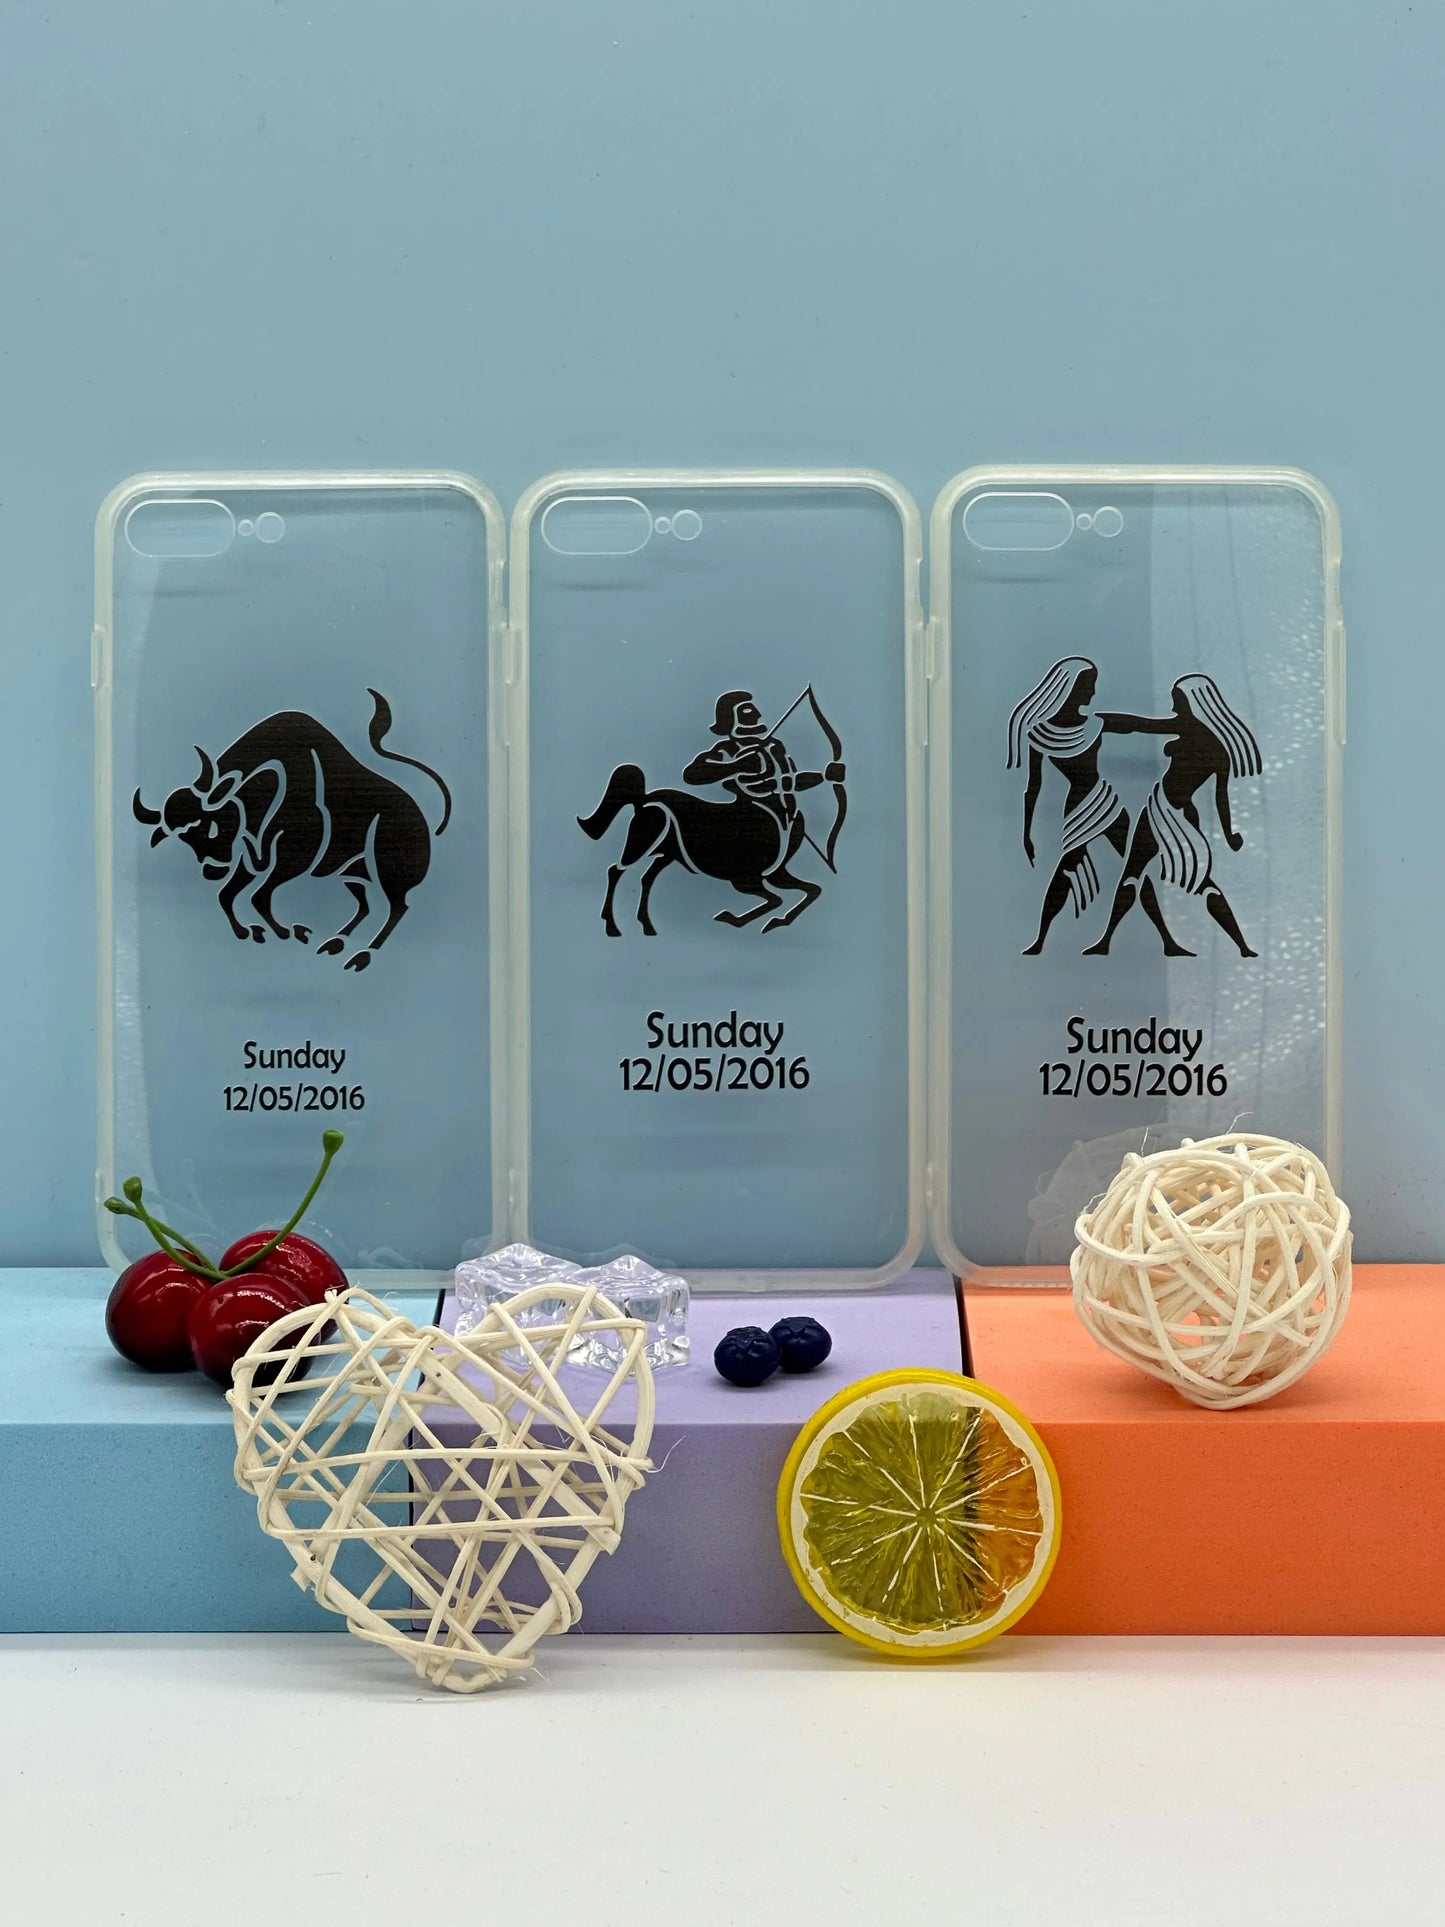 iPhone 12 To 14 Pro Max| Zodiac Signs Transparent Case Sunday's Creative